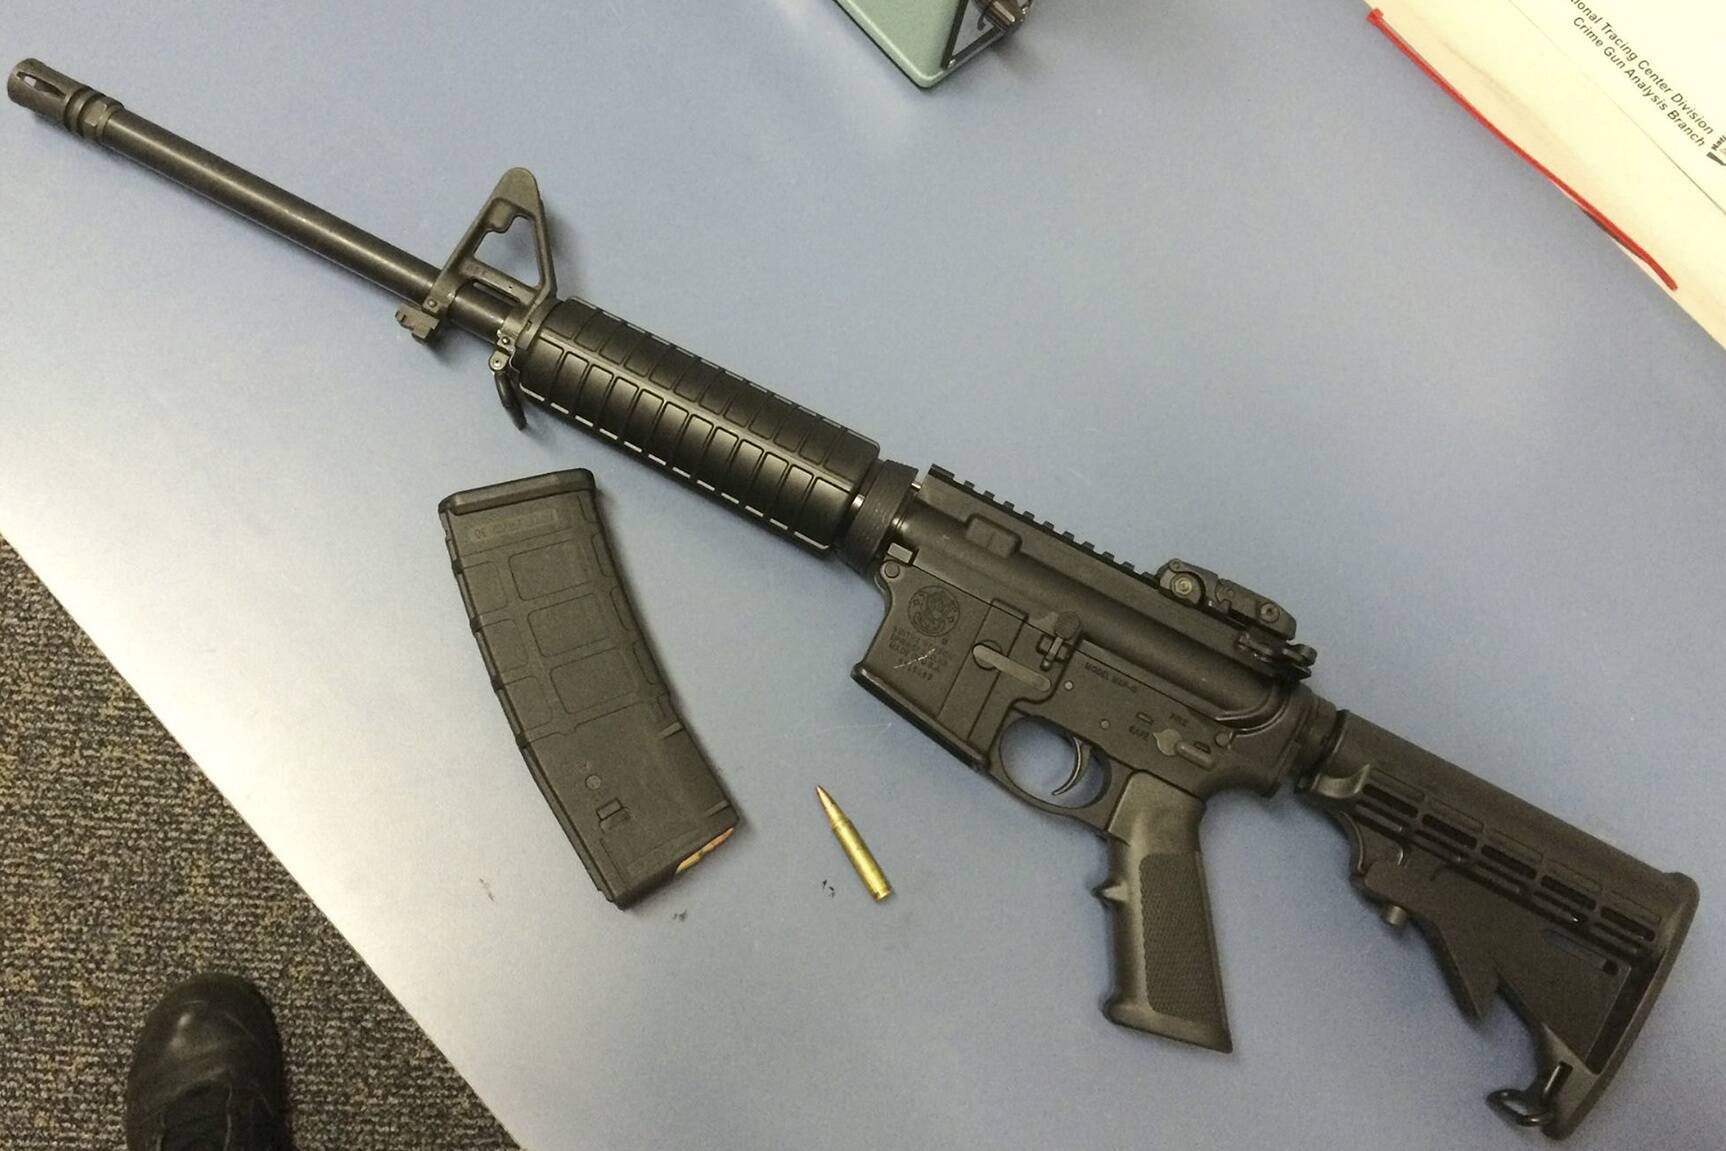 AR-15 rifle that was recovered by Mercer Island police. (File photo)